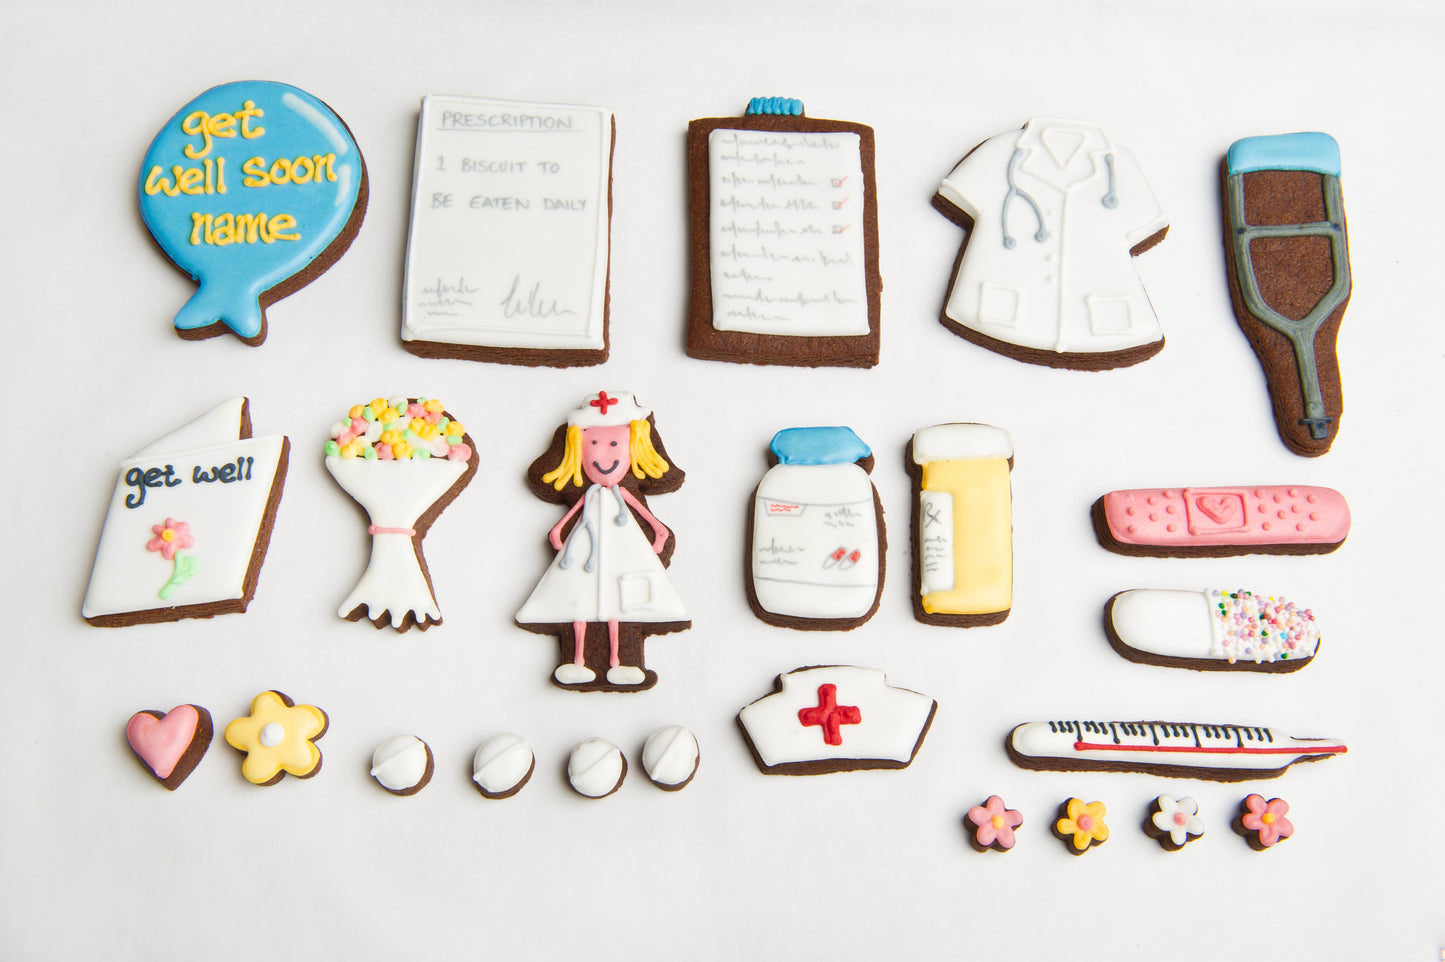 layout of the get well soon tin biscuits. nurse biscuit, doctors coat, prescription cookie.  plaster and pill pots hand iced luxury biscuits.